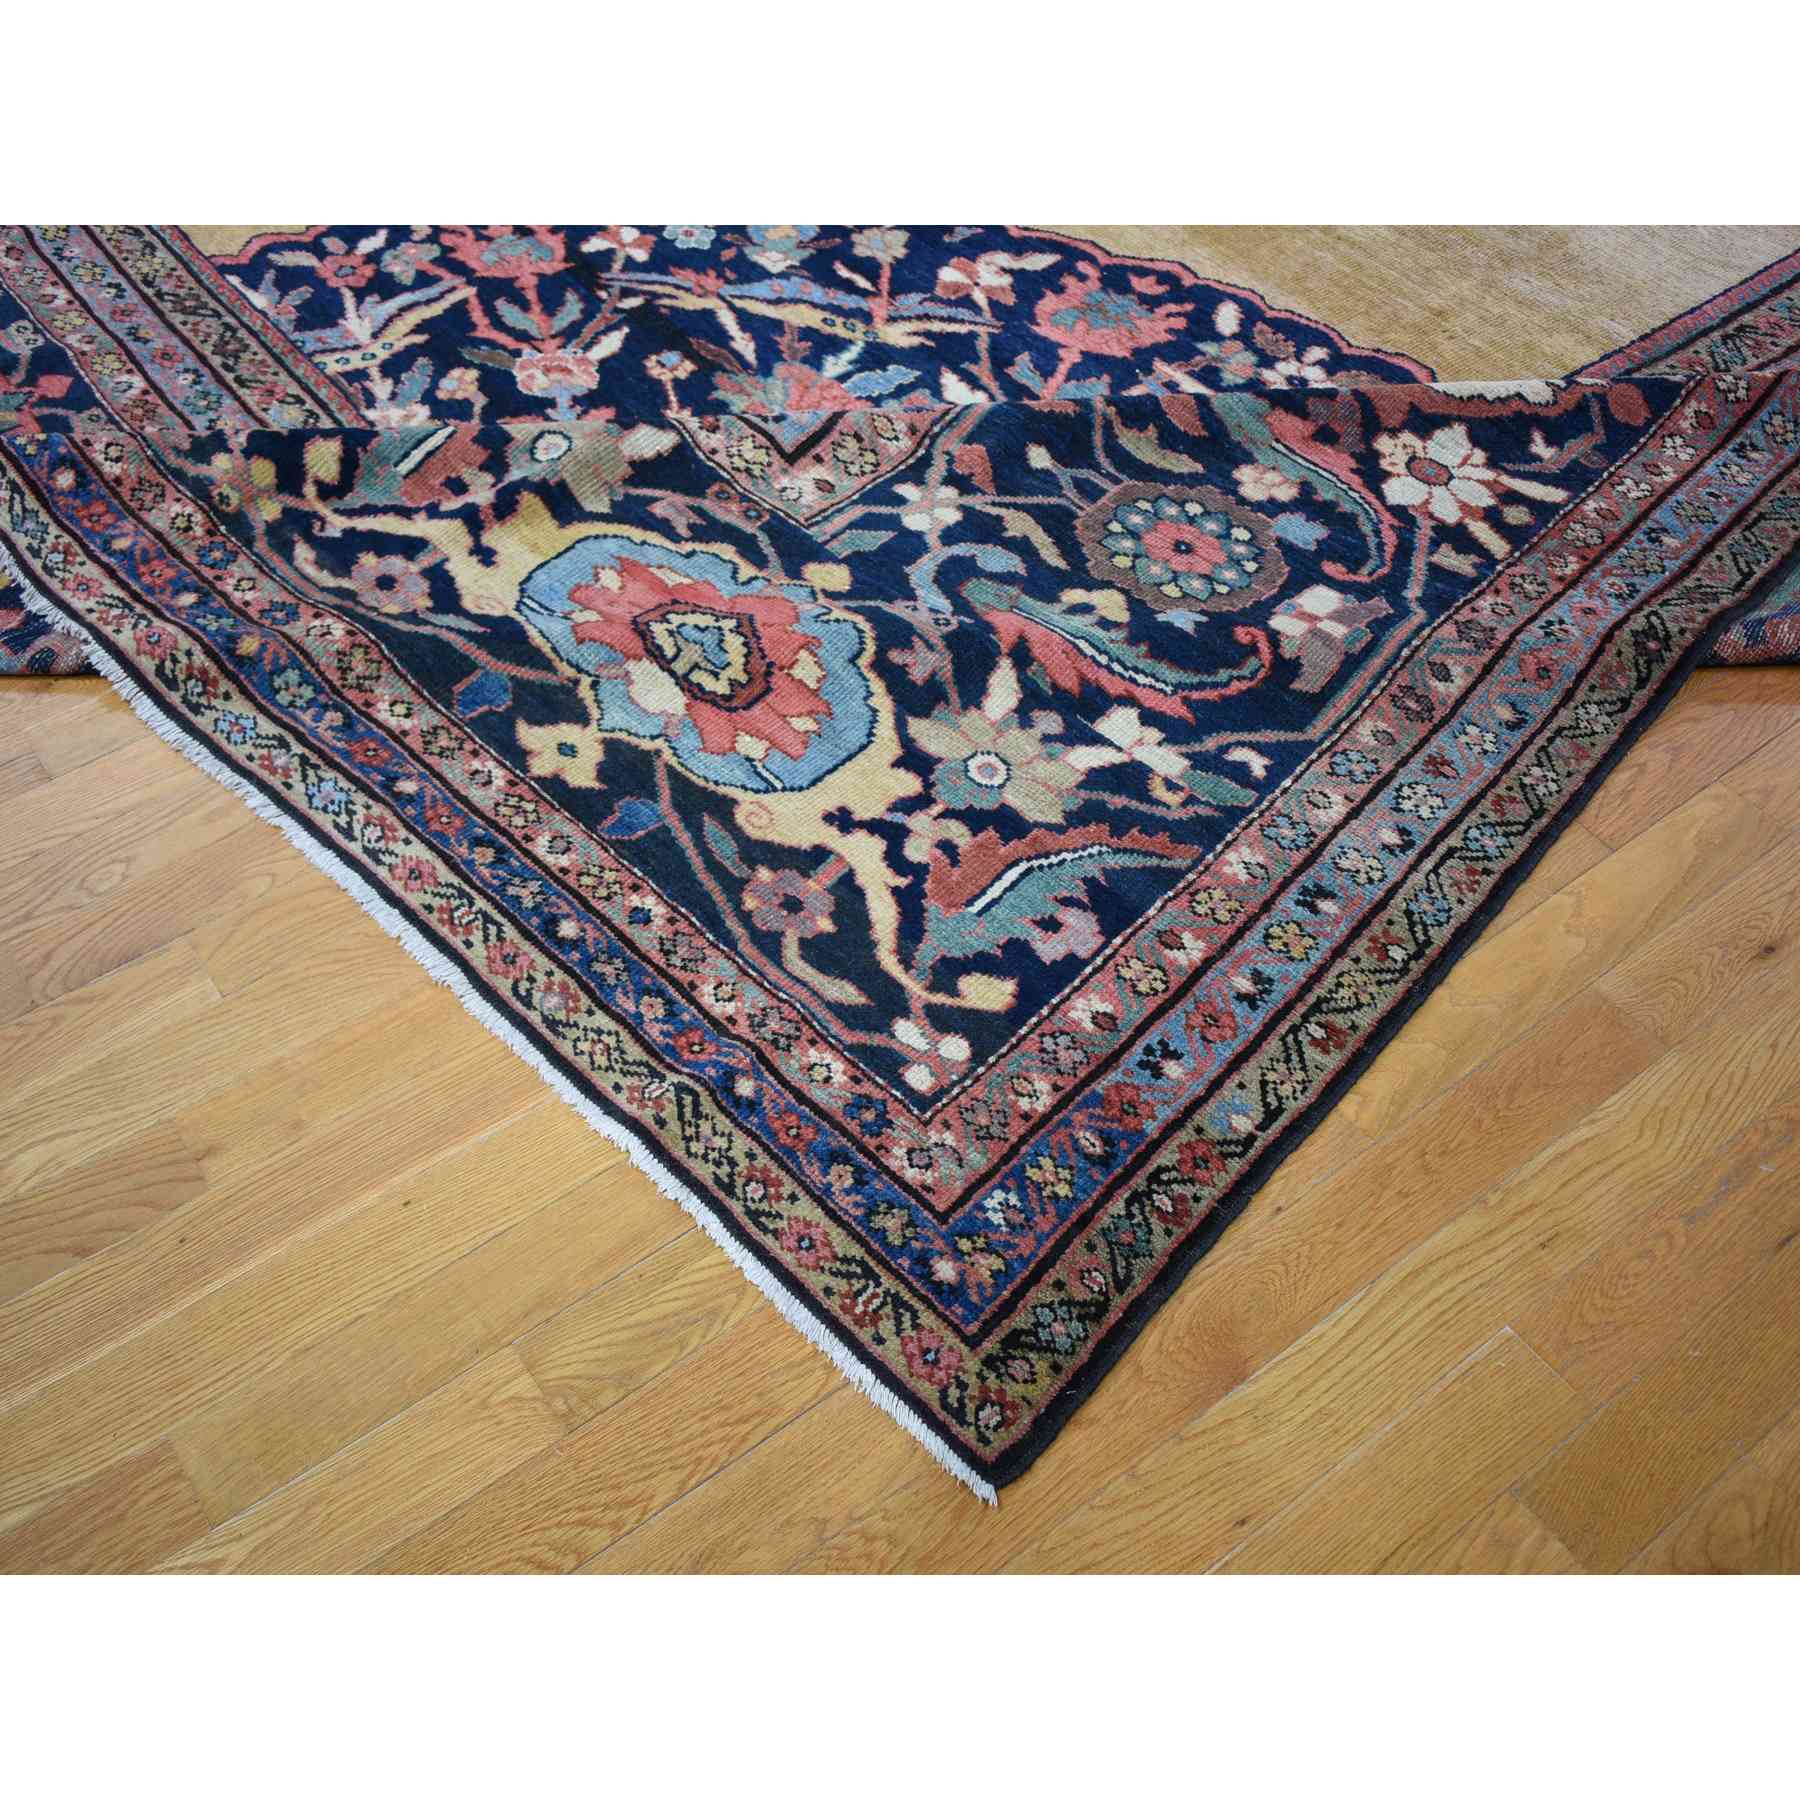 Antique-Hand-Knotted-Rug-296430